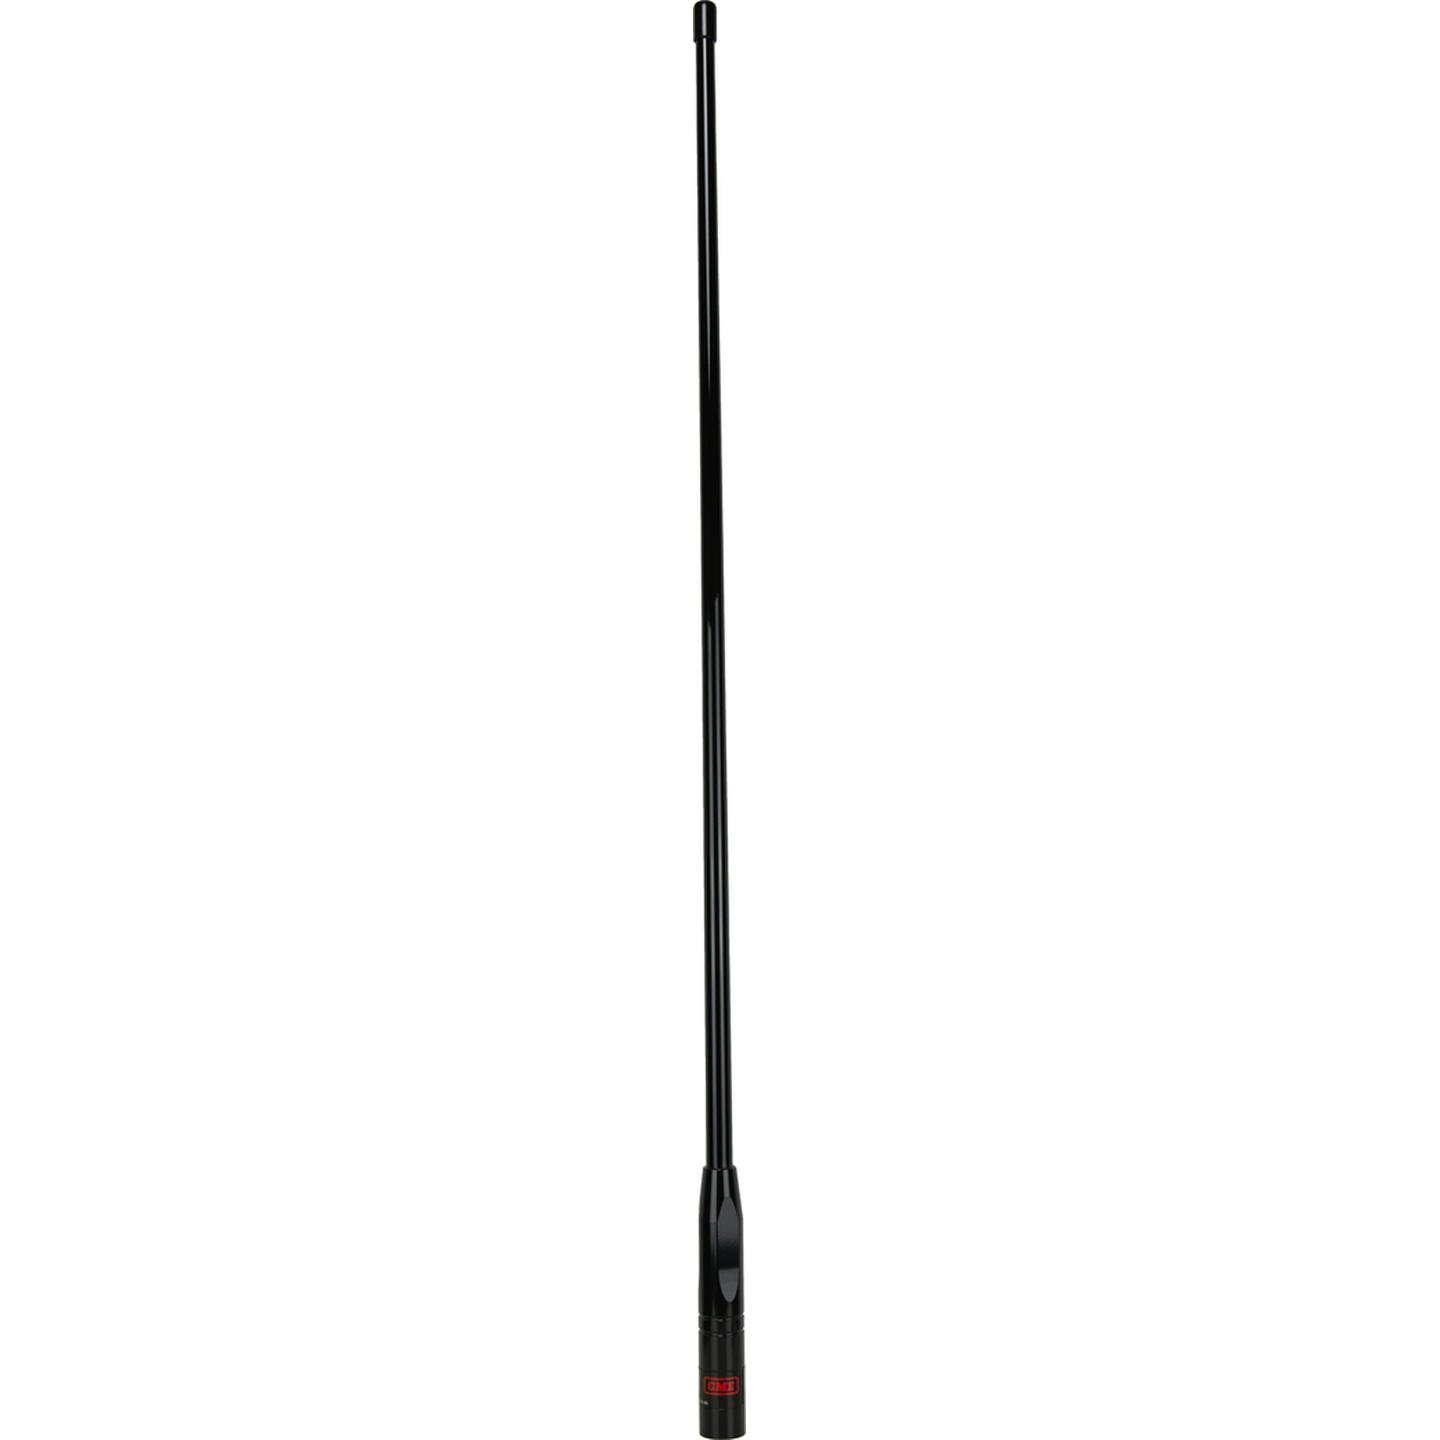 GME Antenna Whip - Suit AE4703 - Black